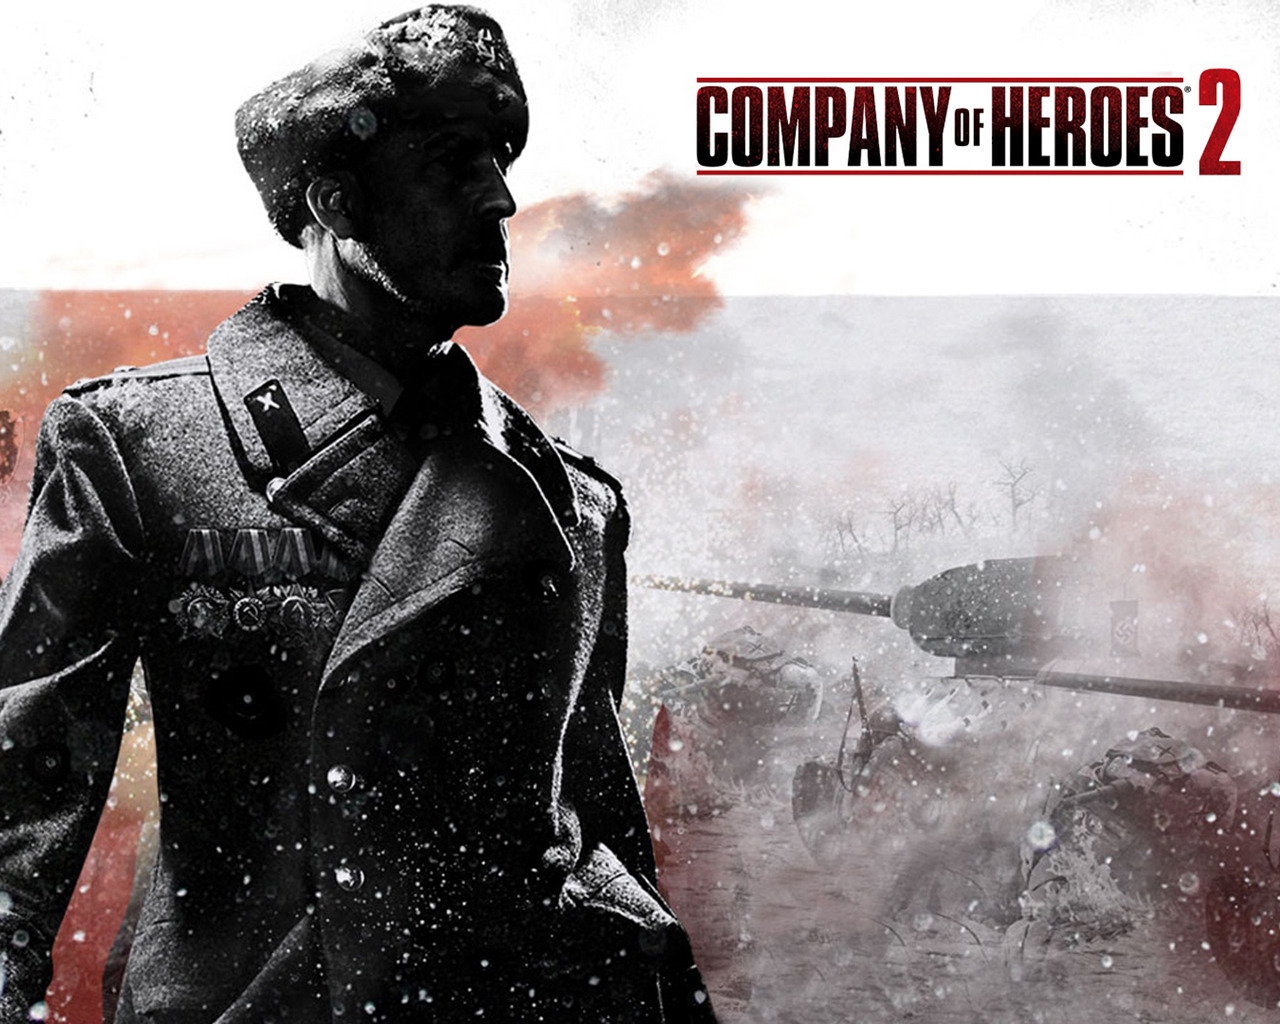 Company of Heroes 2 Character for 1280 x 1024 resolution